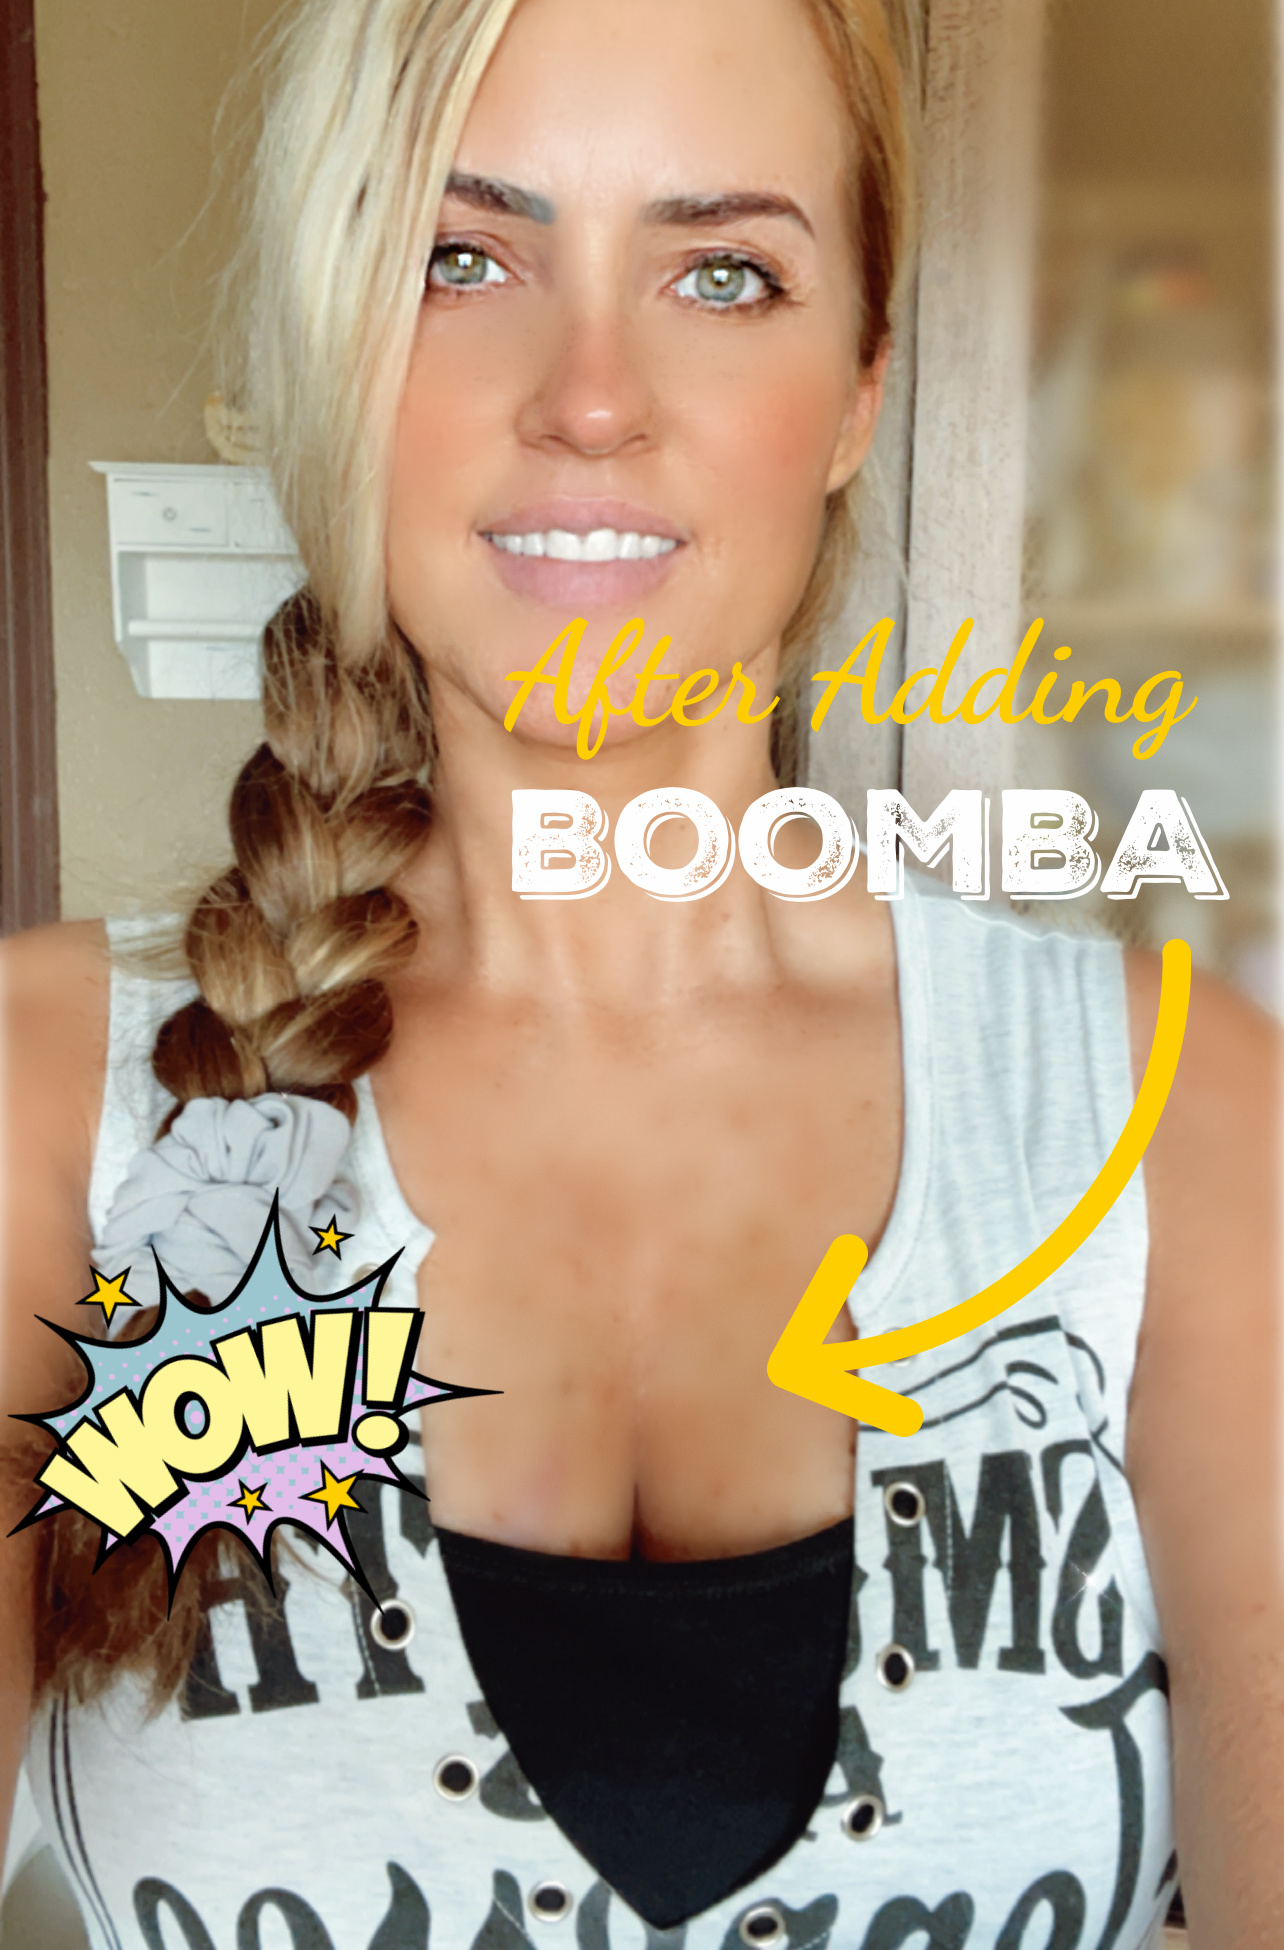 BOOMBA - BOOMBA inserts are inserts and NOT a sticky bra